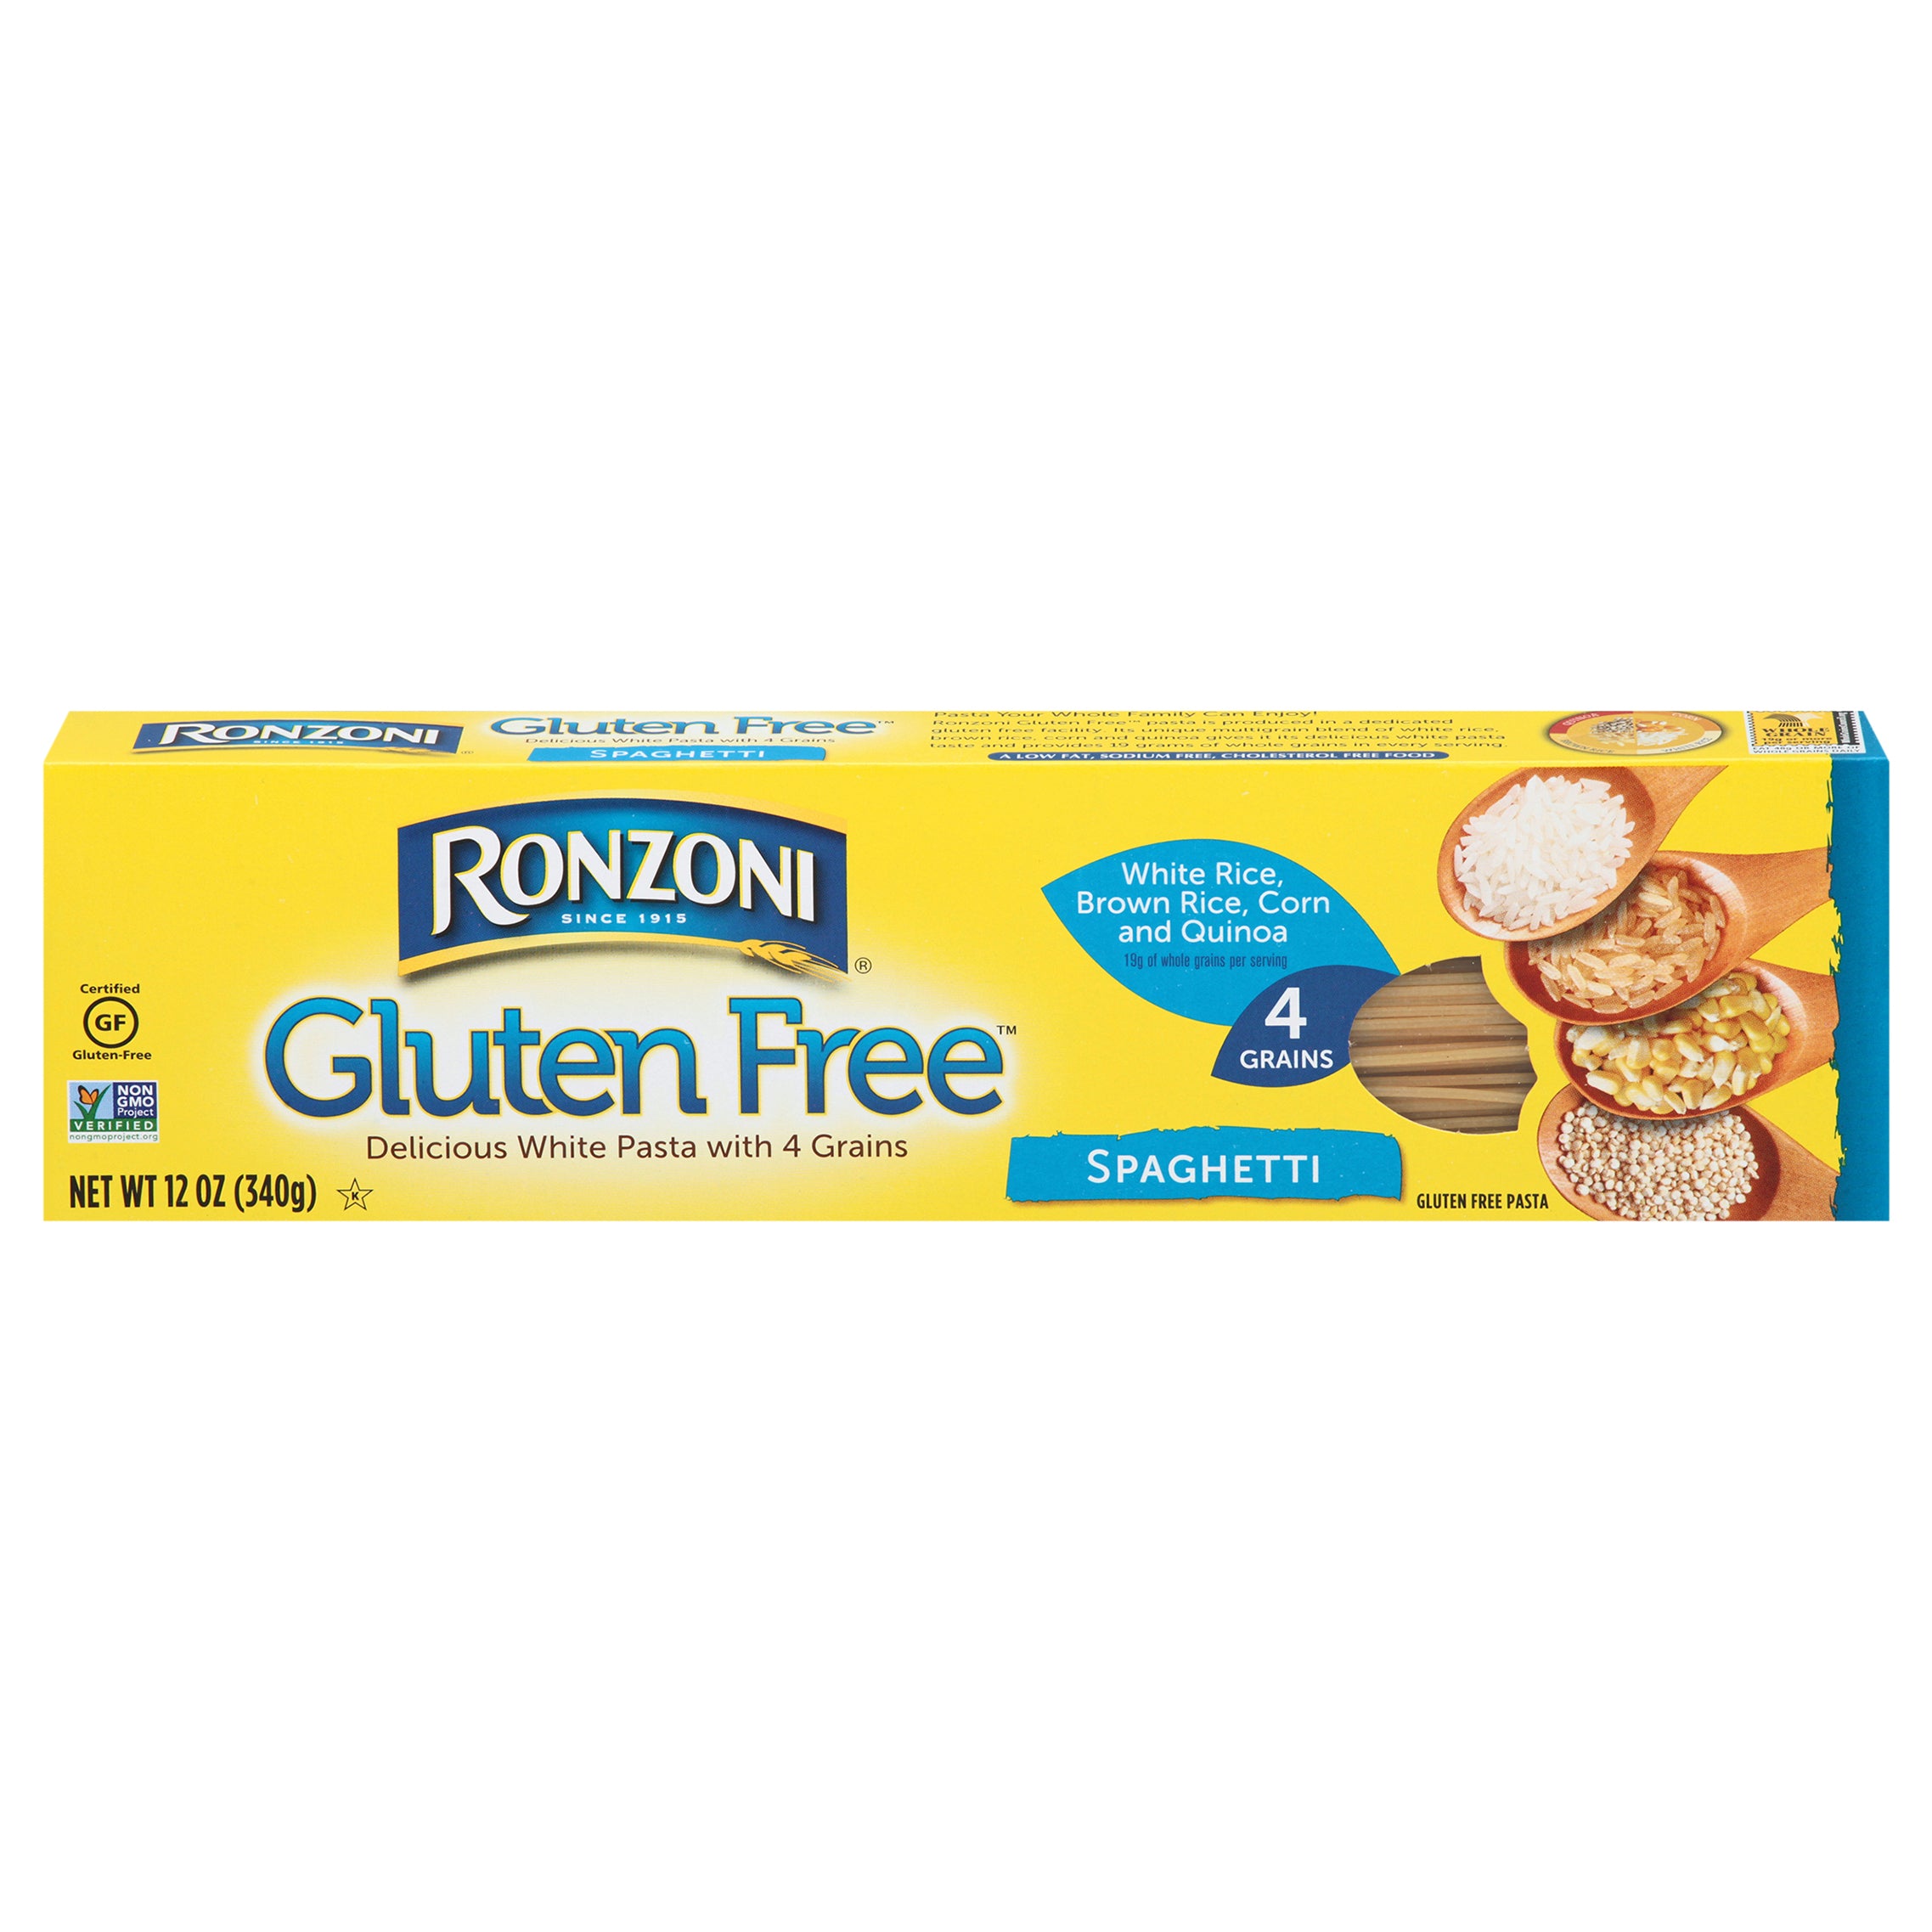 Gluten-free cleaning products - Children's National